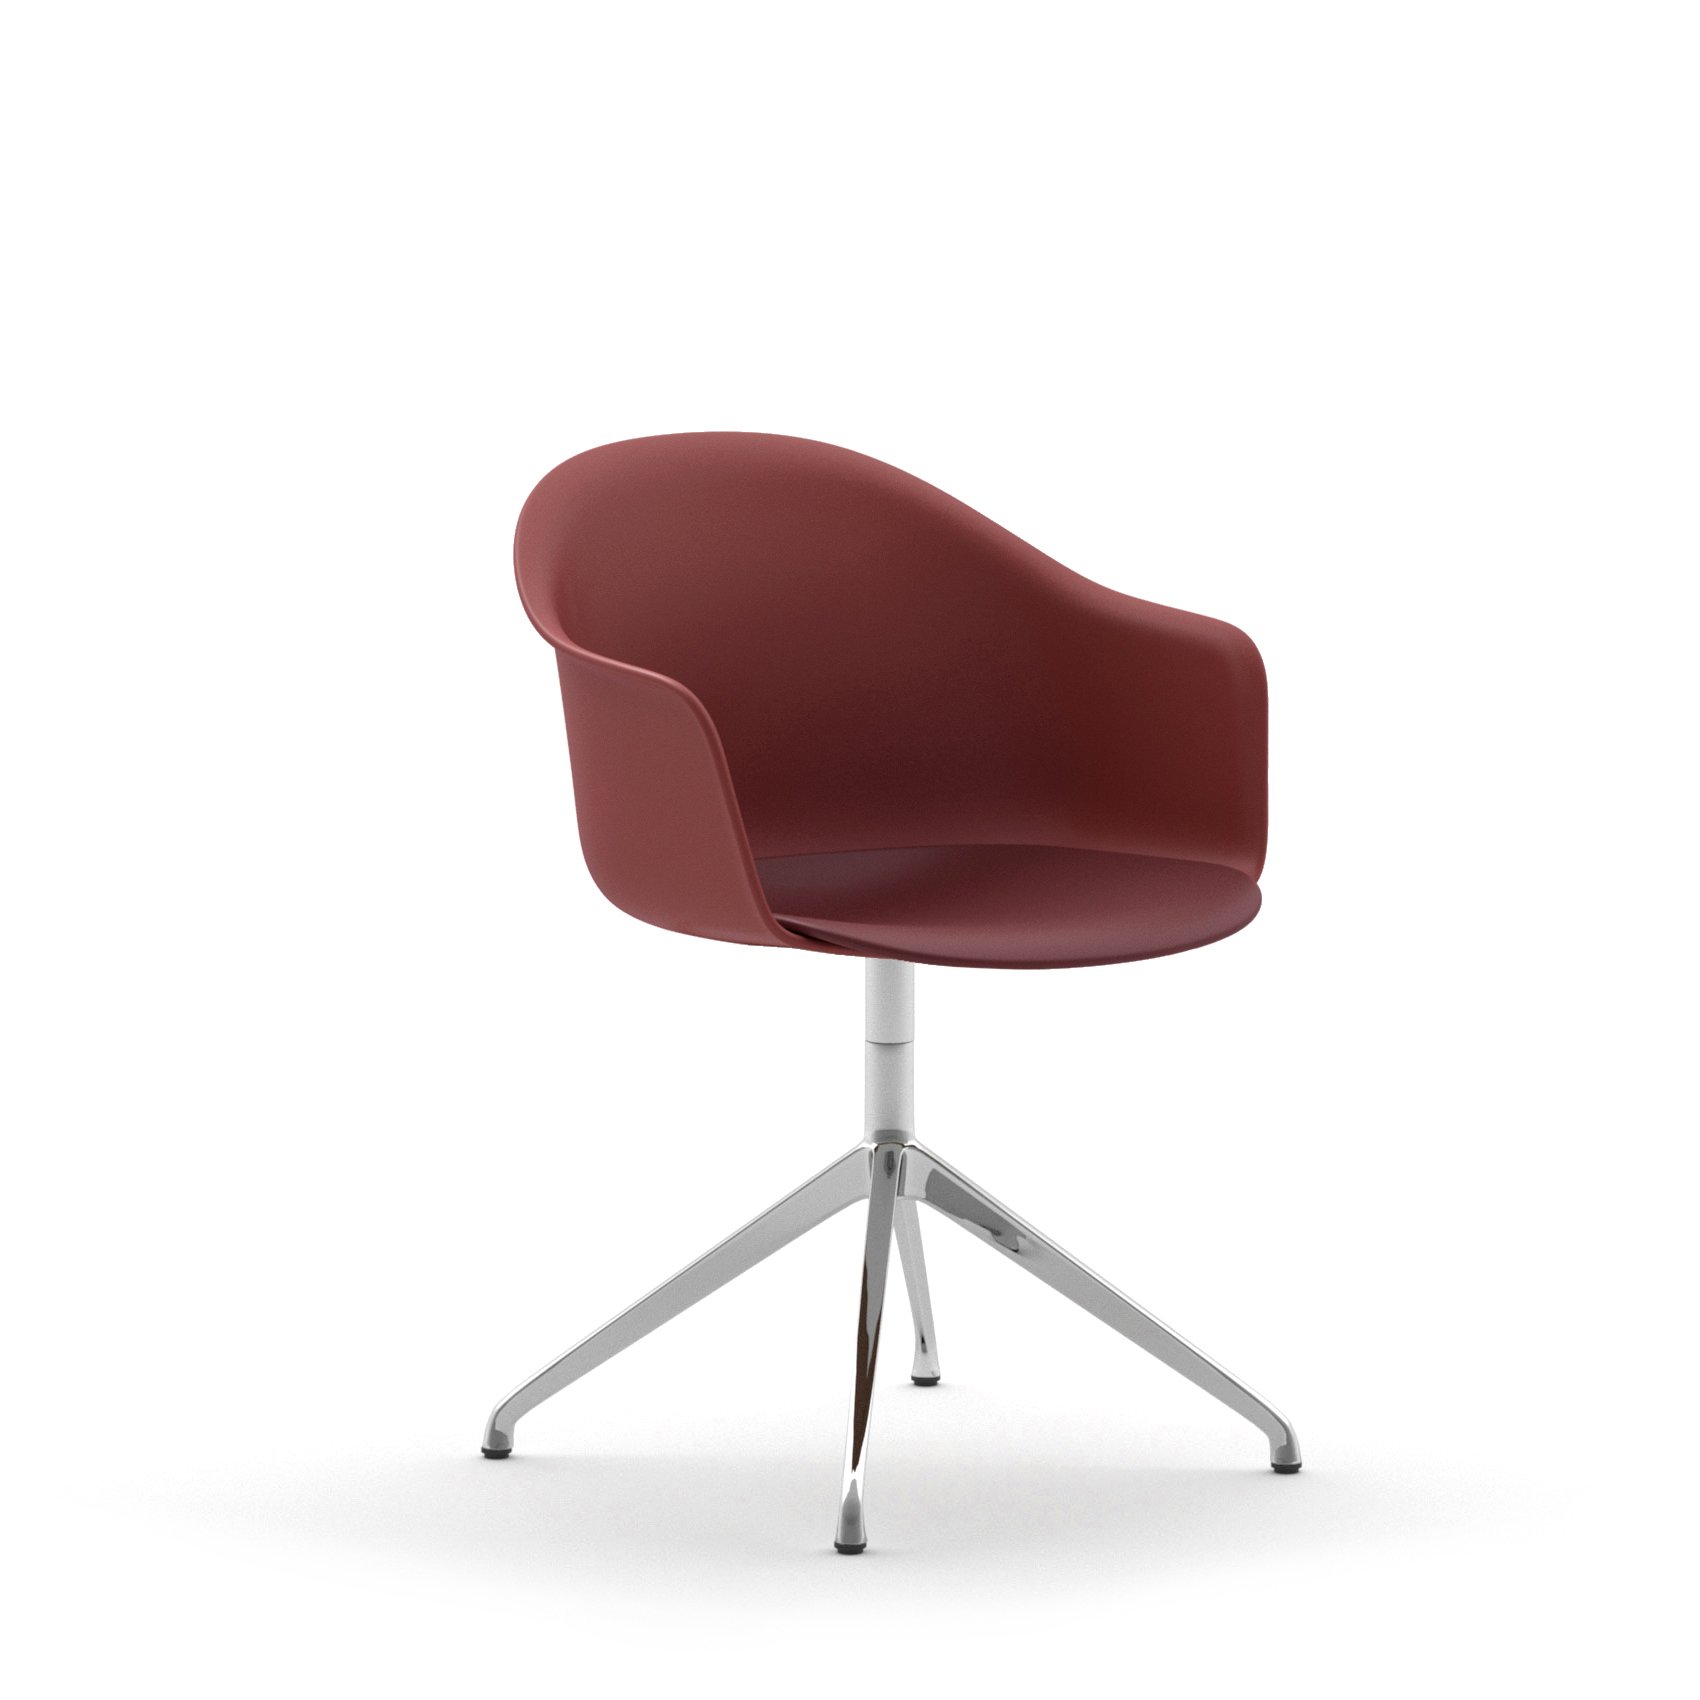 Mani Armshell SP Swivel Armchair office from Arrmet, designed by Welling/Ludvik